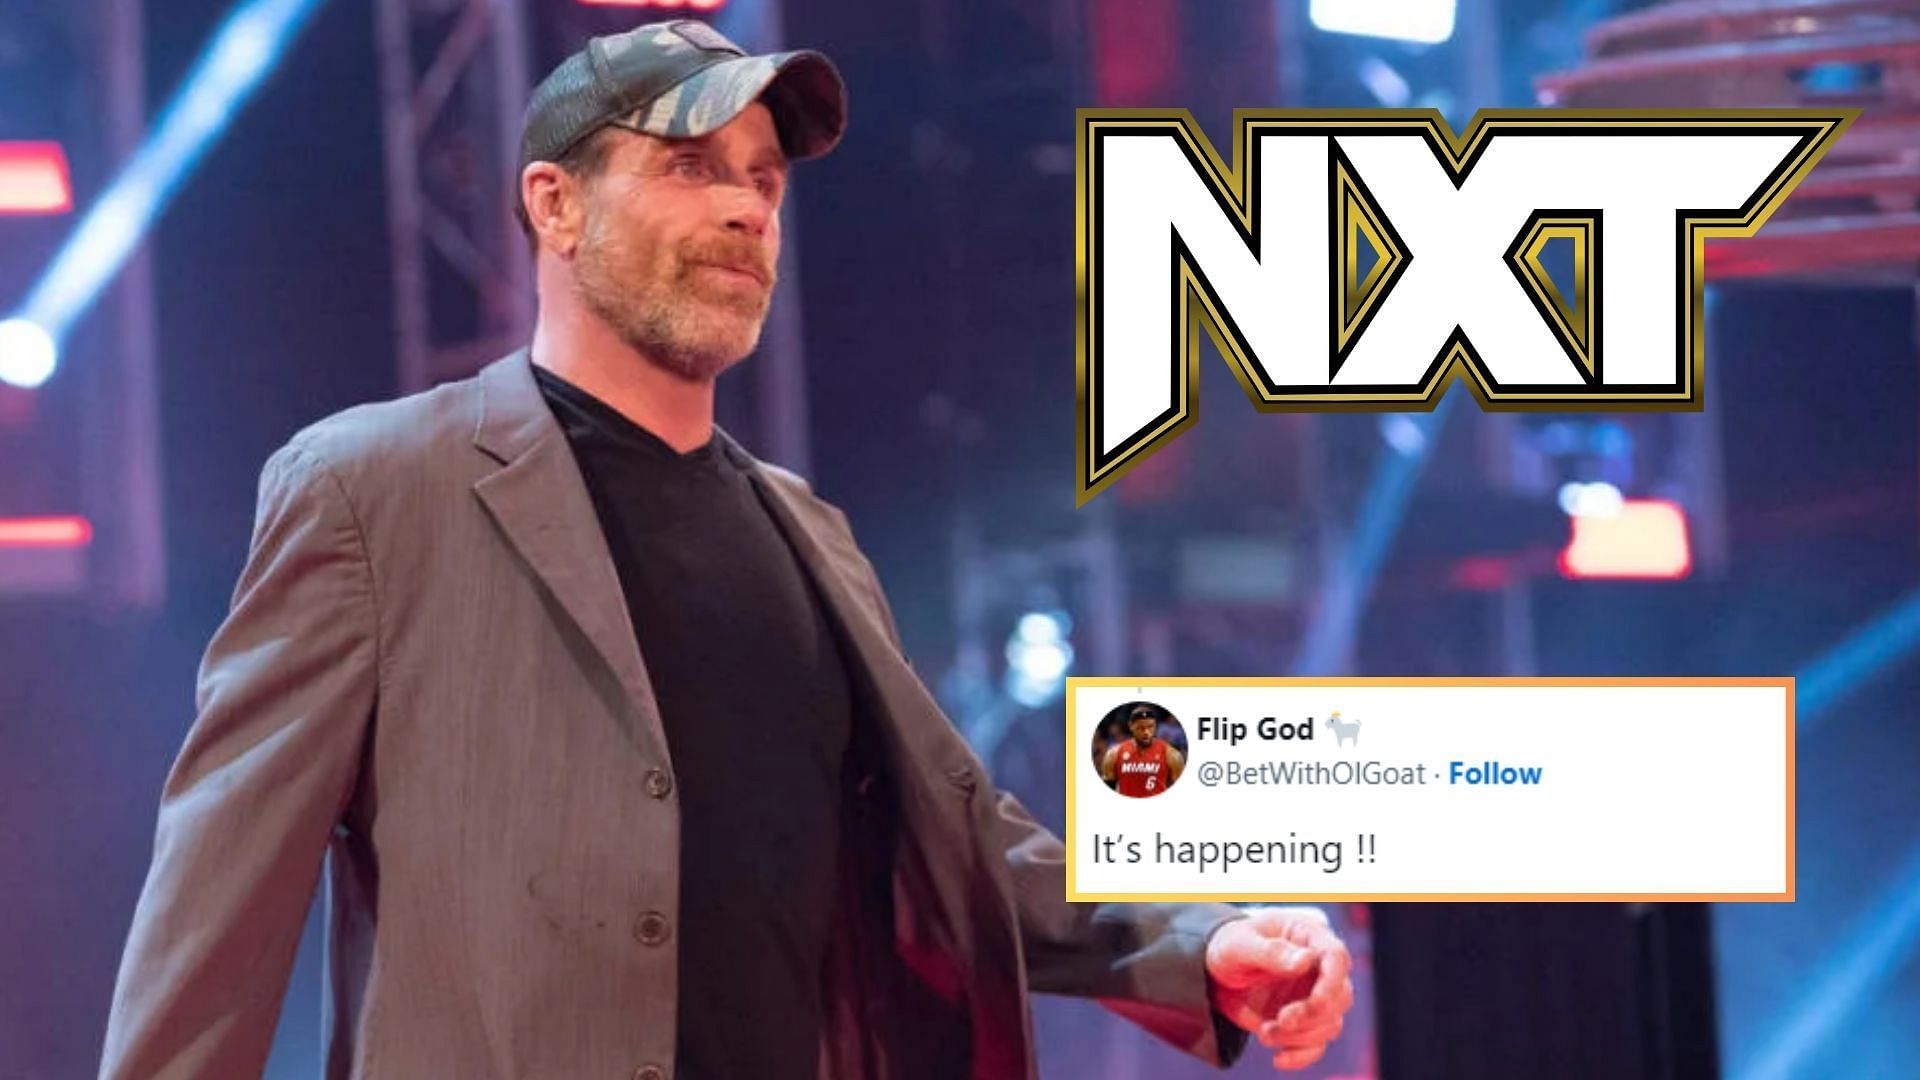 HBK is ready to have this major star in NXT.